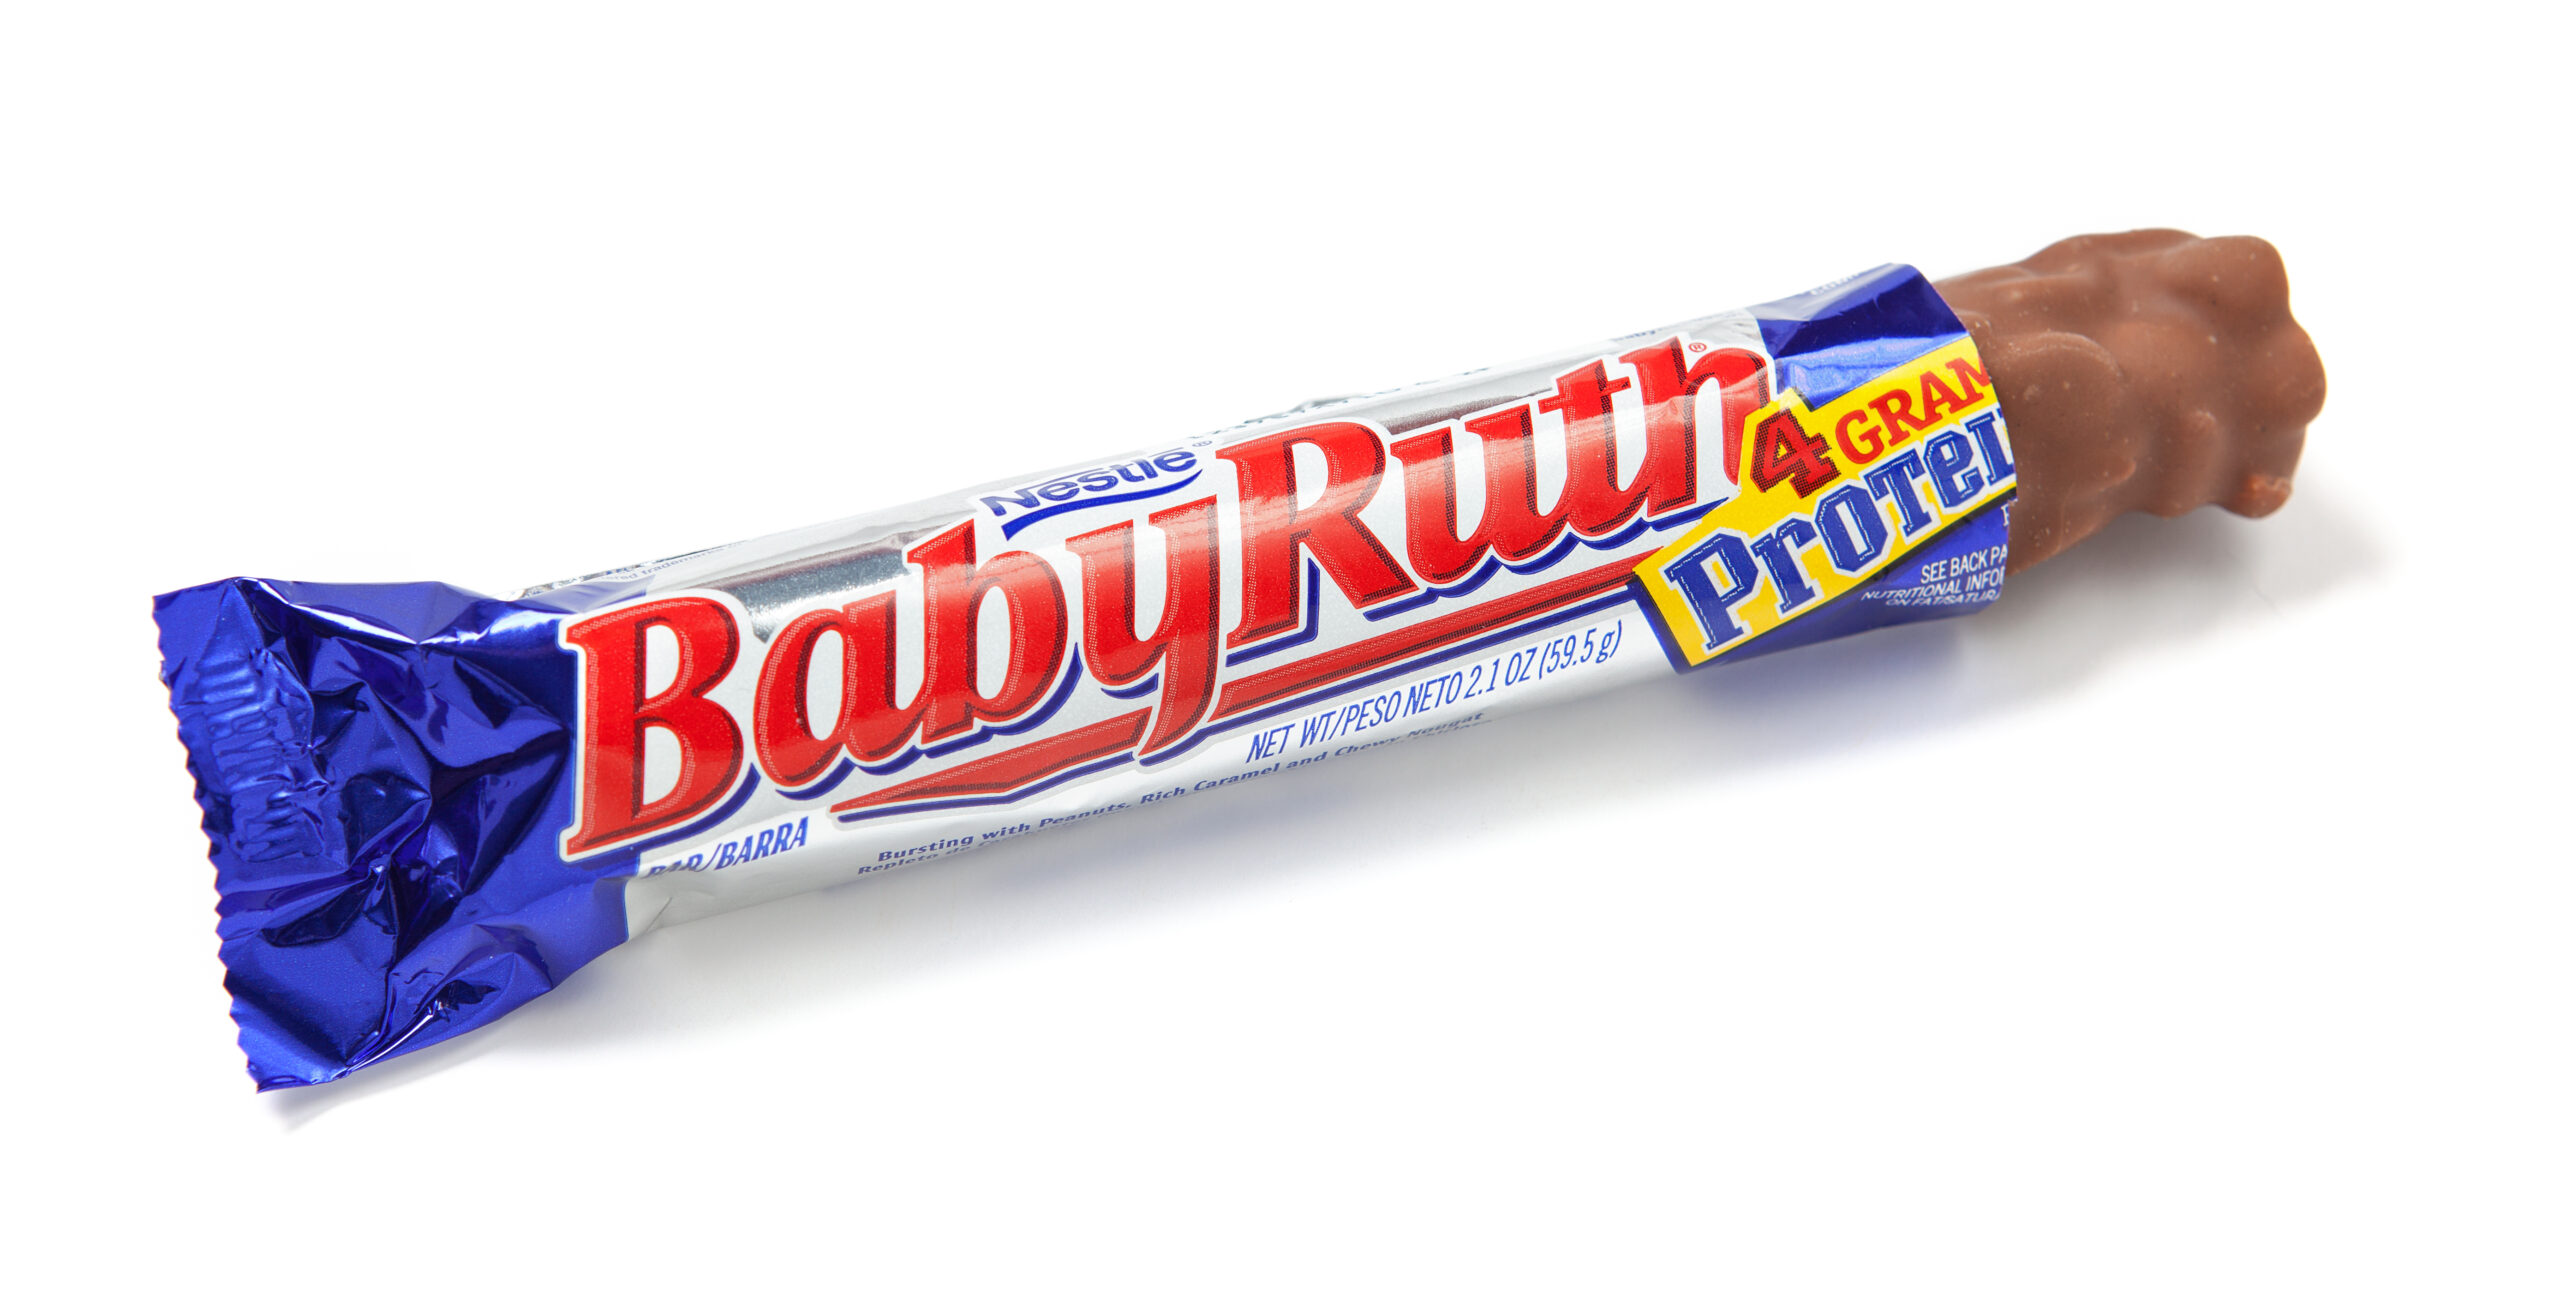 Toronto, Canada - May 10, 2012: This is a studio shot of a Baby Ruth candy bar made by Nestle isolated on a white background.